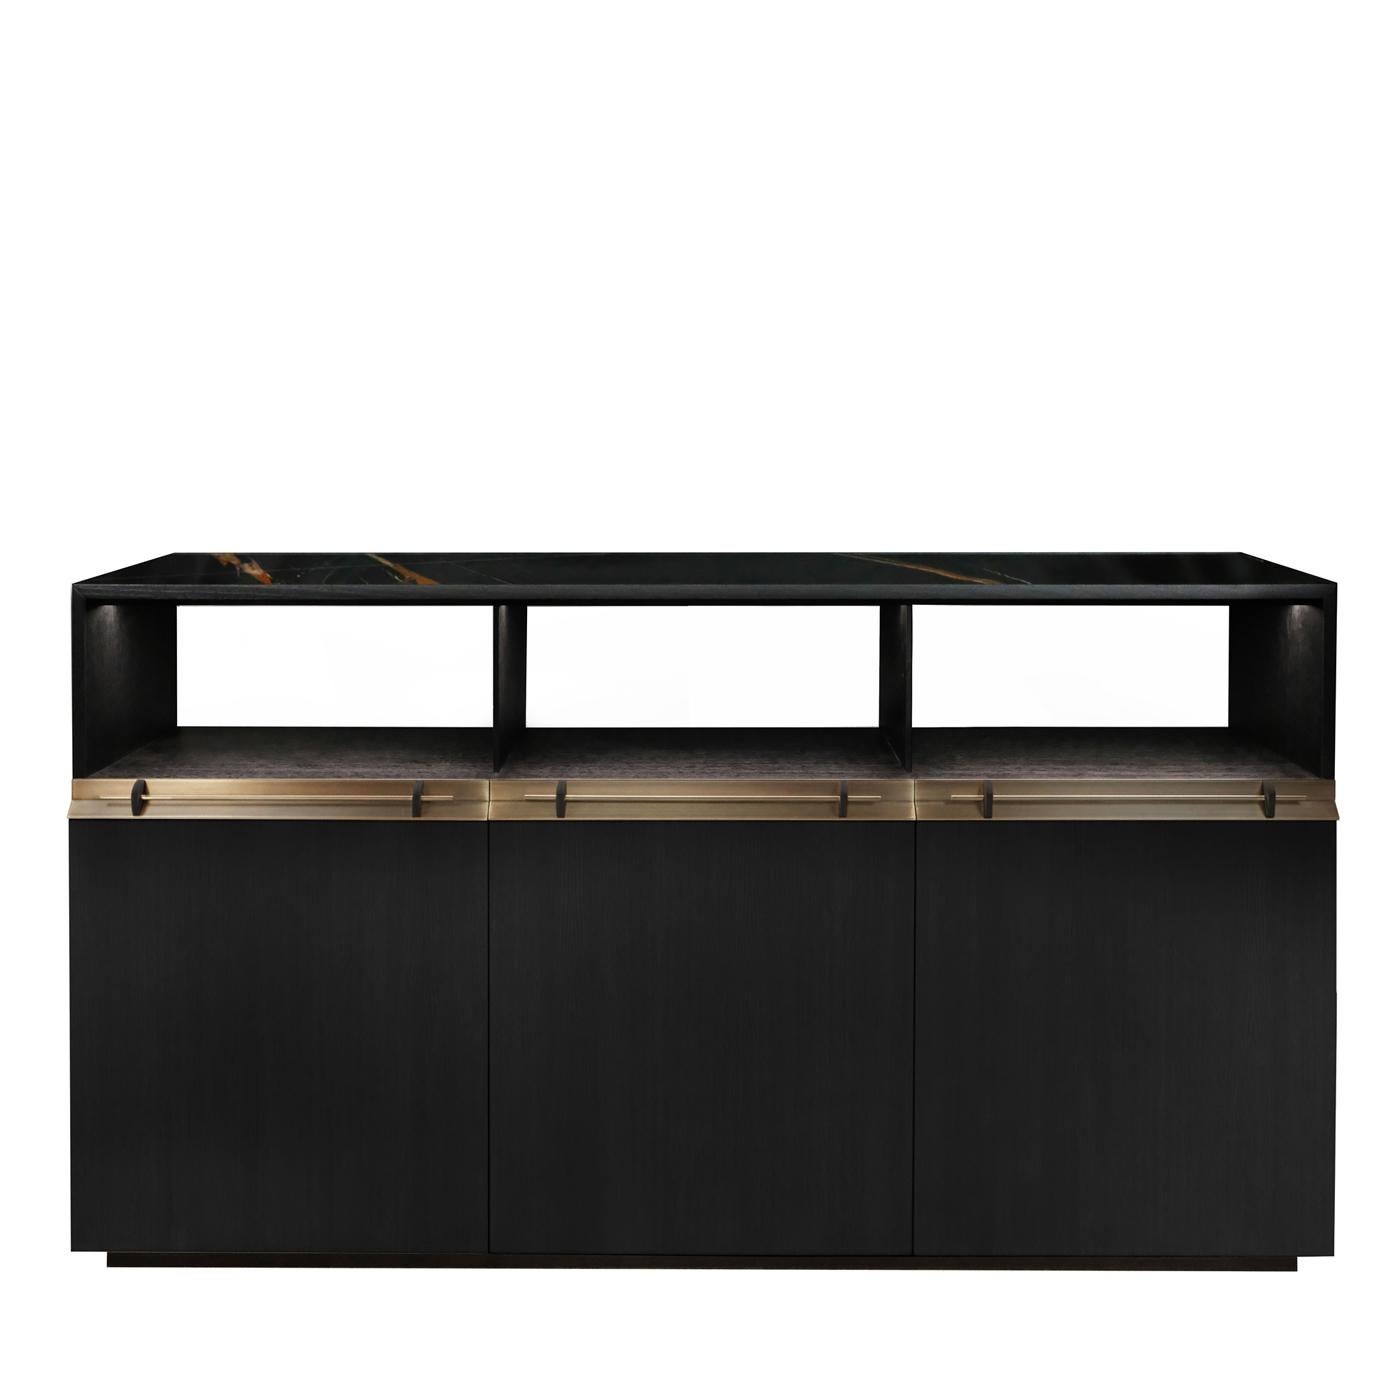 Timeless elegance and refined sophistication mark this stunning sideboard. The frame is made of oak with a matte black stained finish and comprises three doors with galvanized metal handles. A captivating Nero Guinea marble slab graces the top,